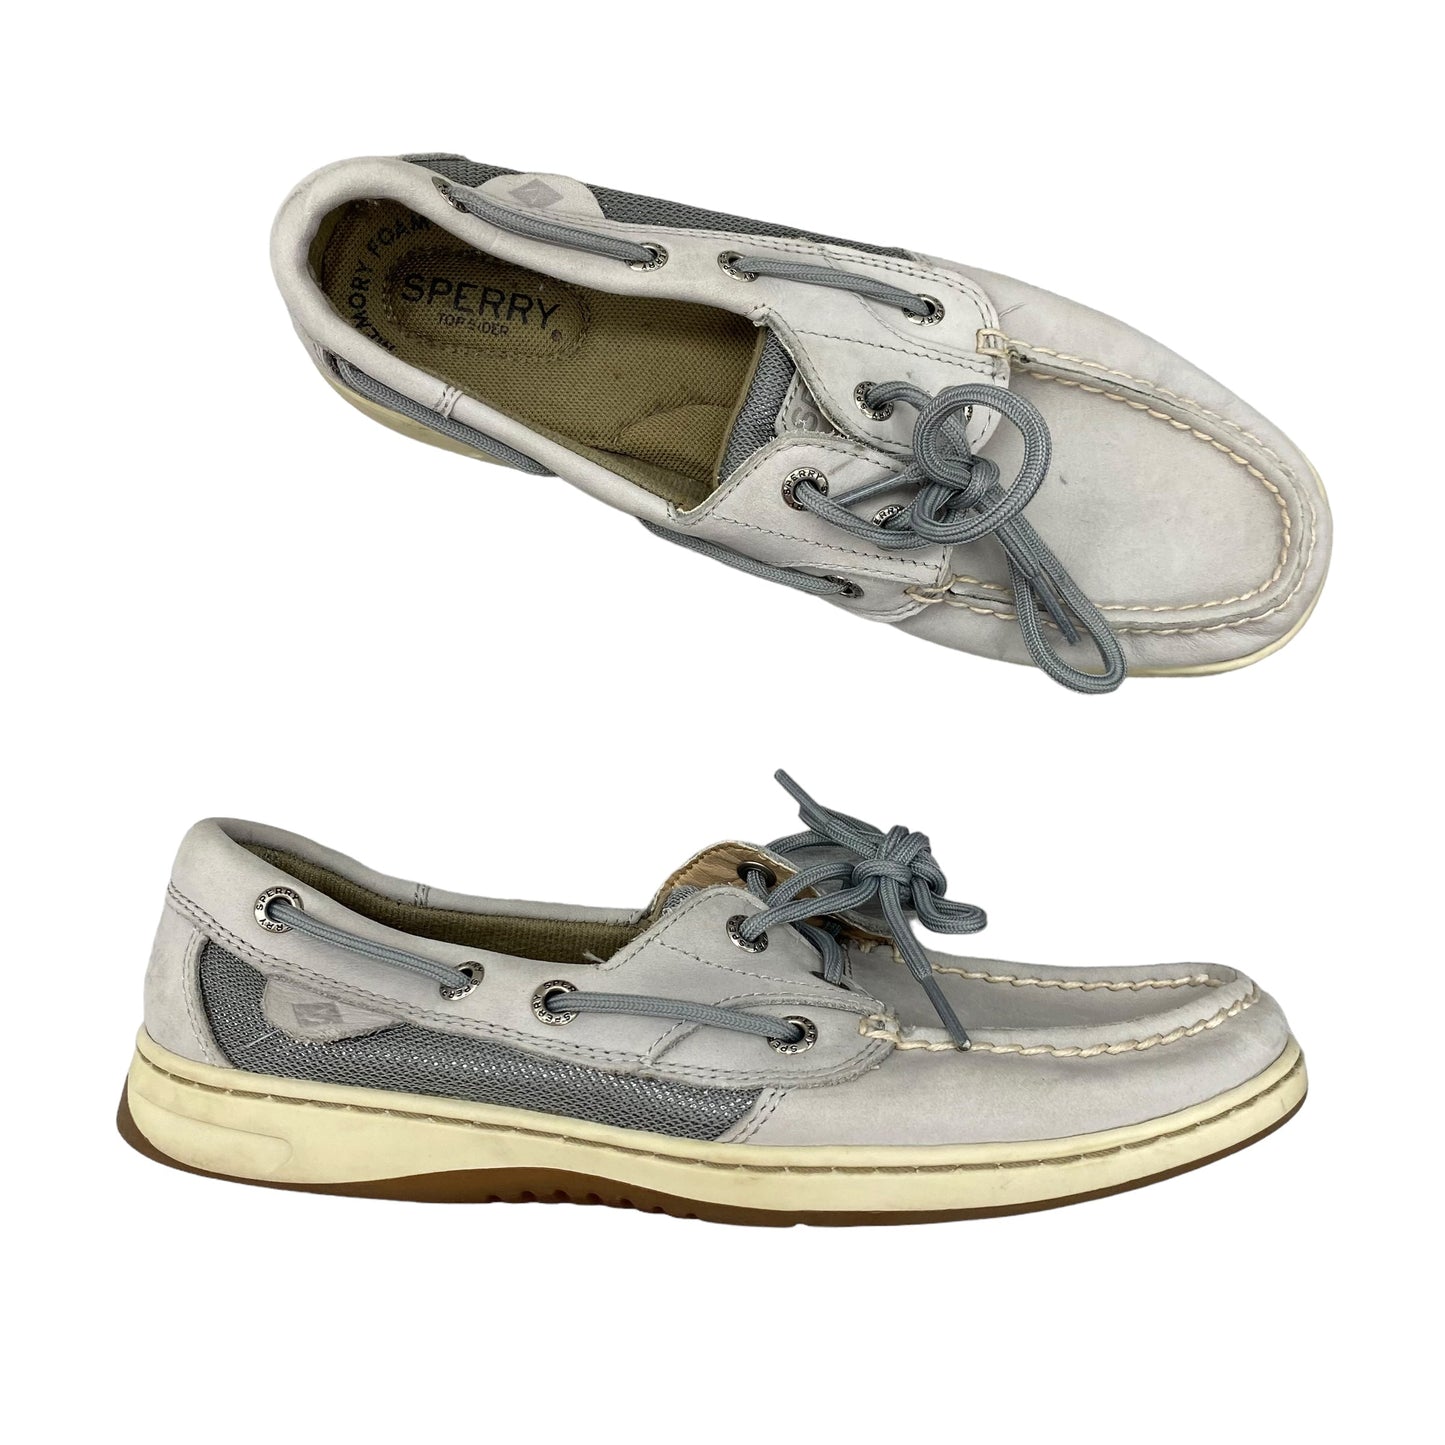 Shoes Flats By Sperry  Size: 7.5